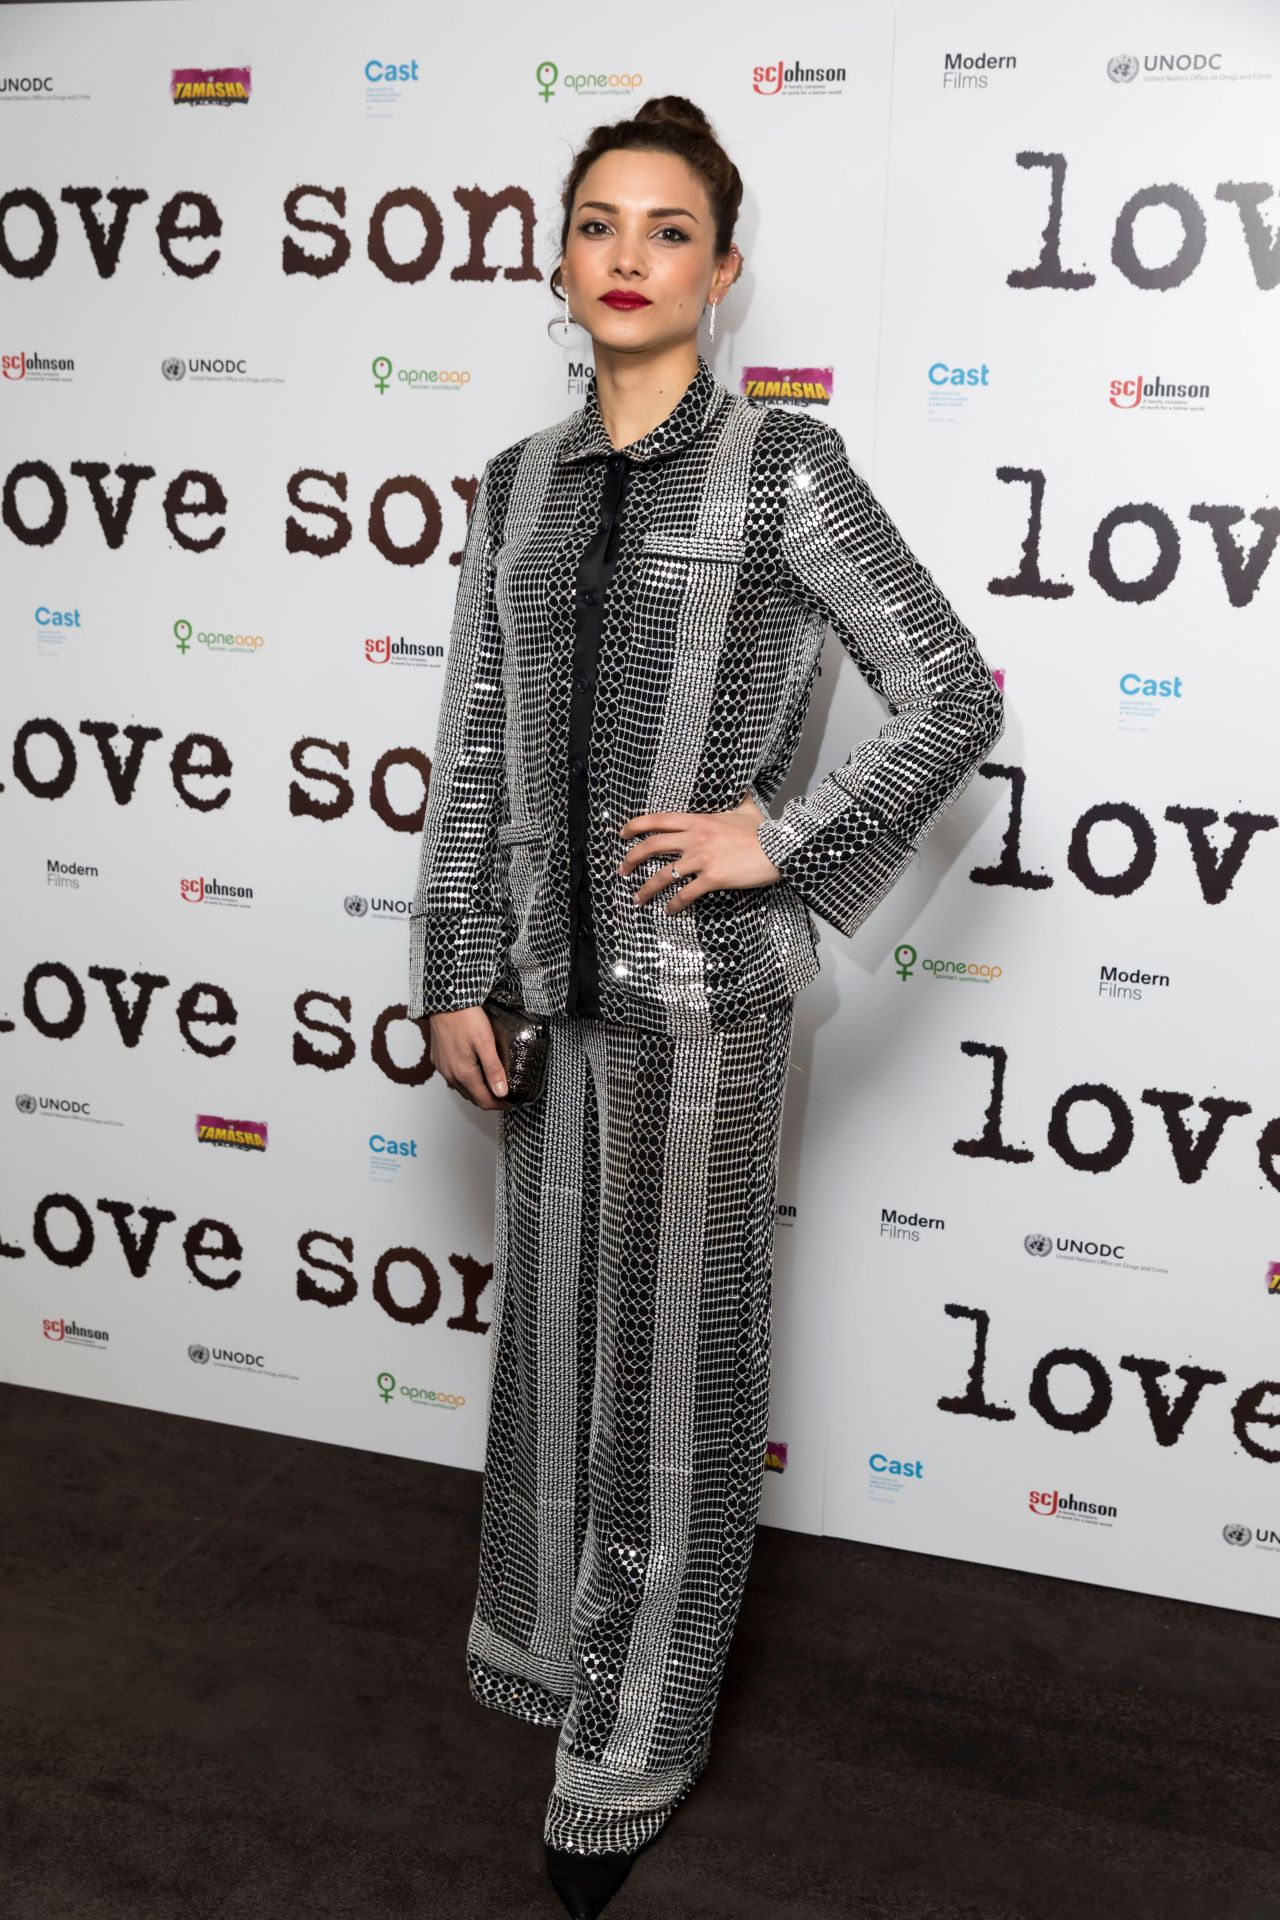 Amber rose revah style clothes outfits and fashion â